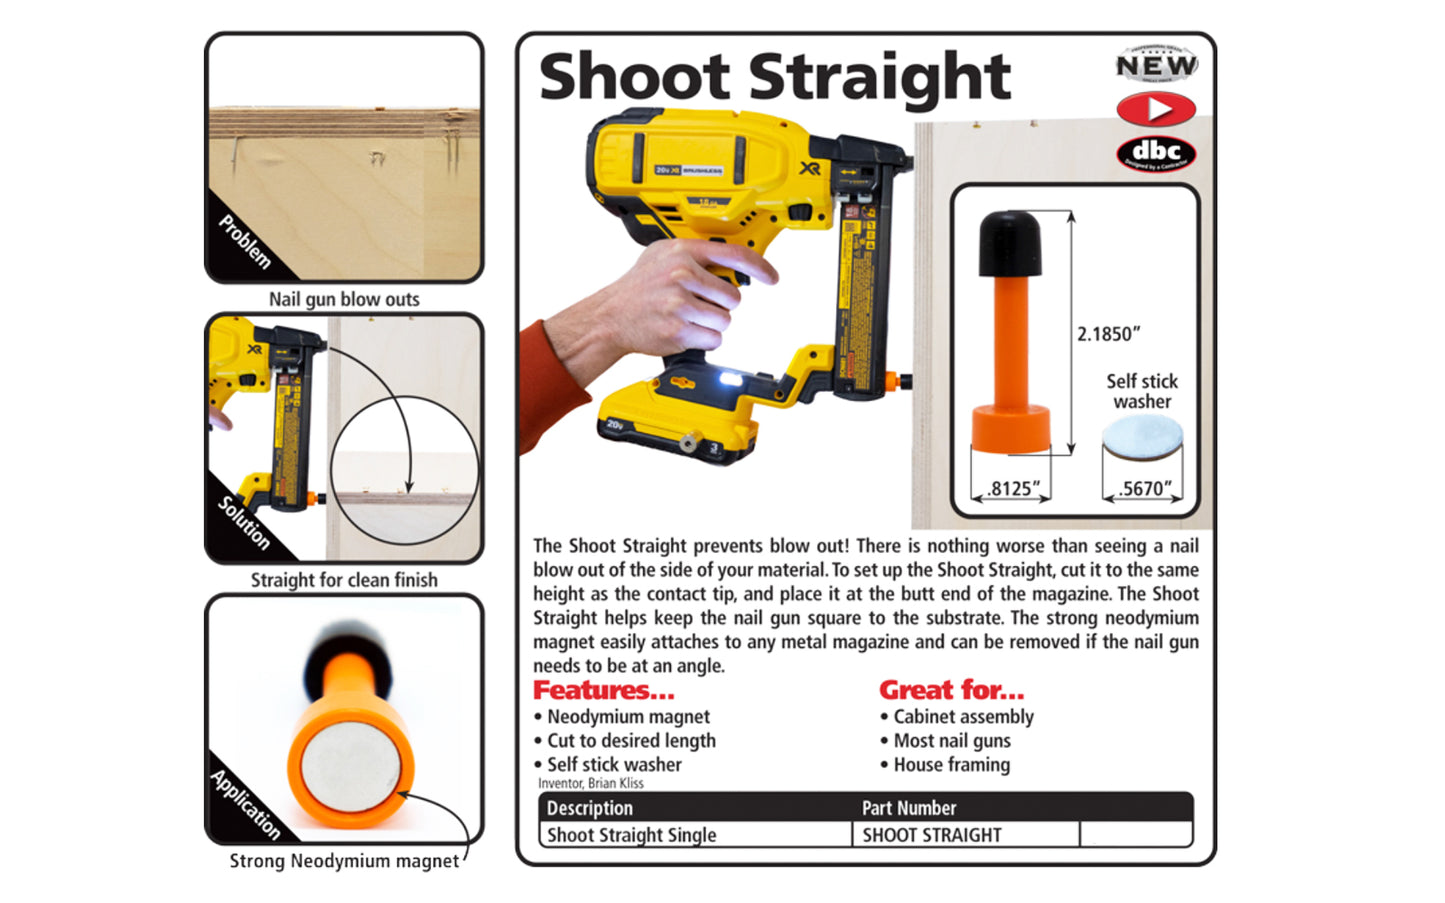 FastCap "Shoot Straight" for nail guns helps prevents blow out. FastCap Model SHOOT STRAIGHT. Strong neodymium magnet in base. Great for cabinet assembly, framing, etc. Strong neodymium magnet easily attaches to any metal magazine & can be removed if the nail gun needs to be at an angle. 663807030320